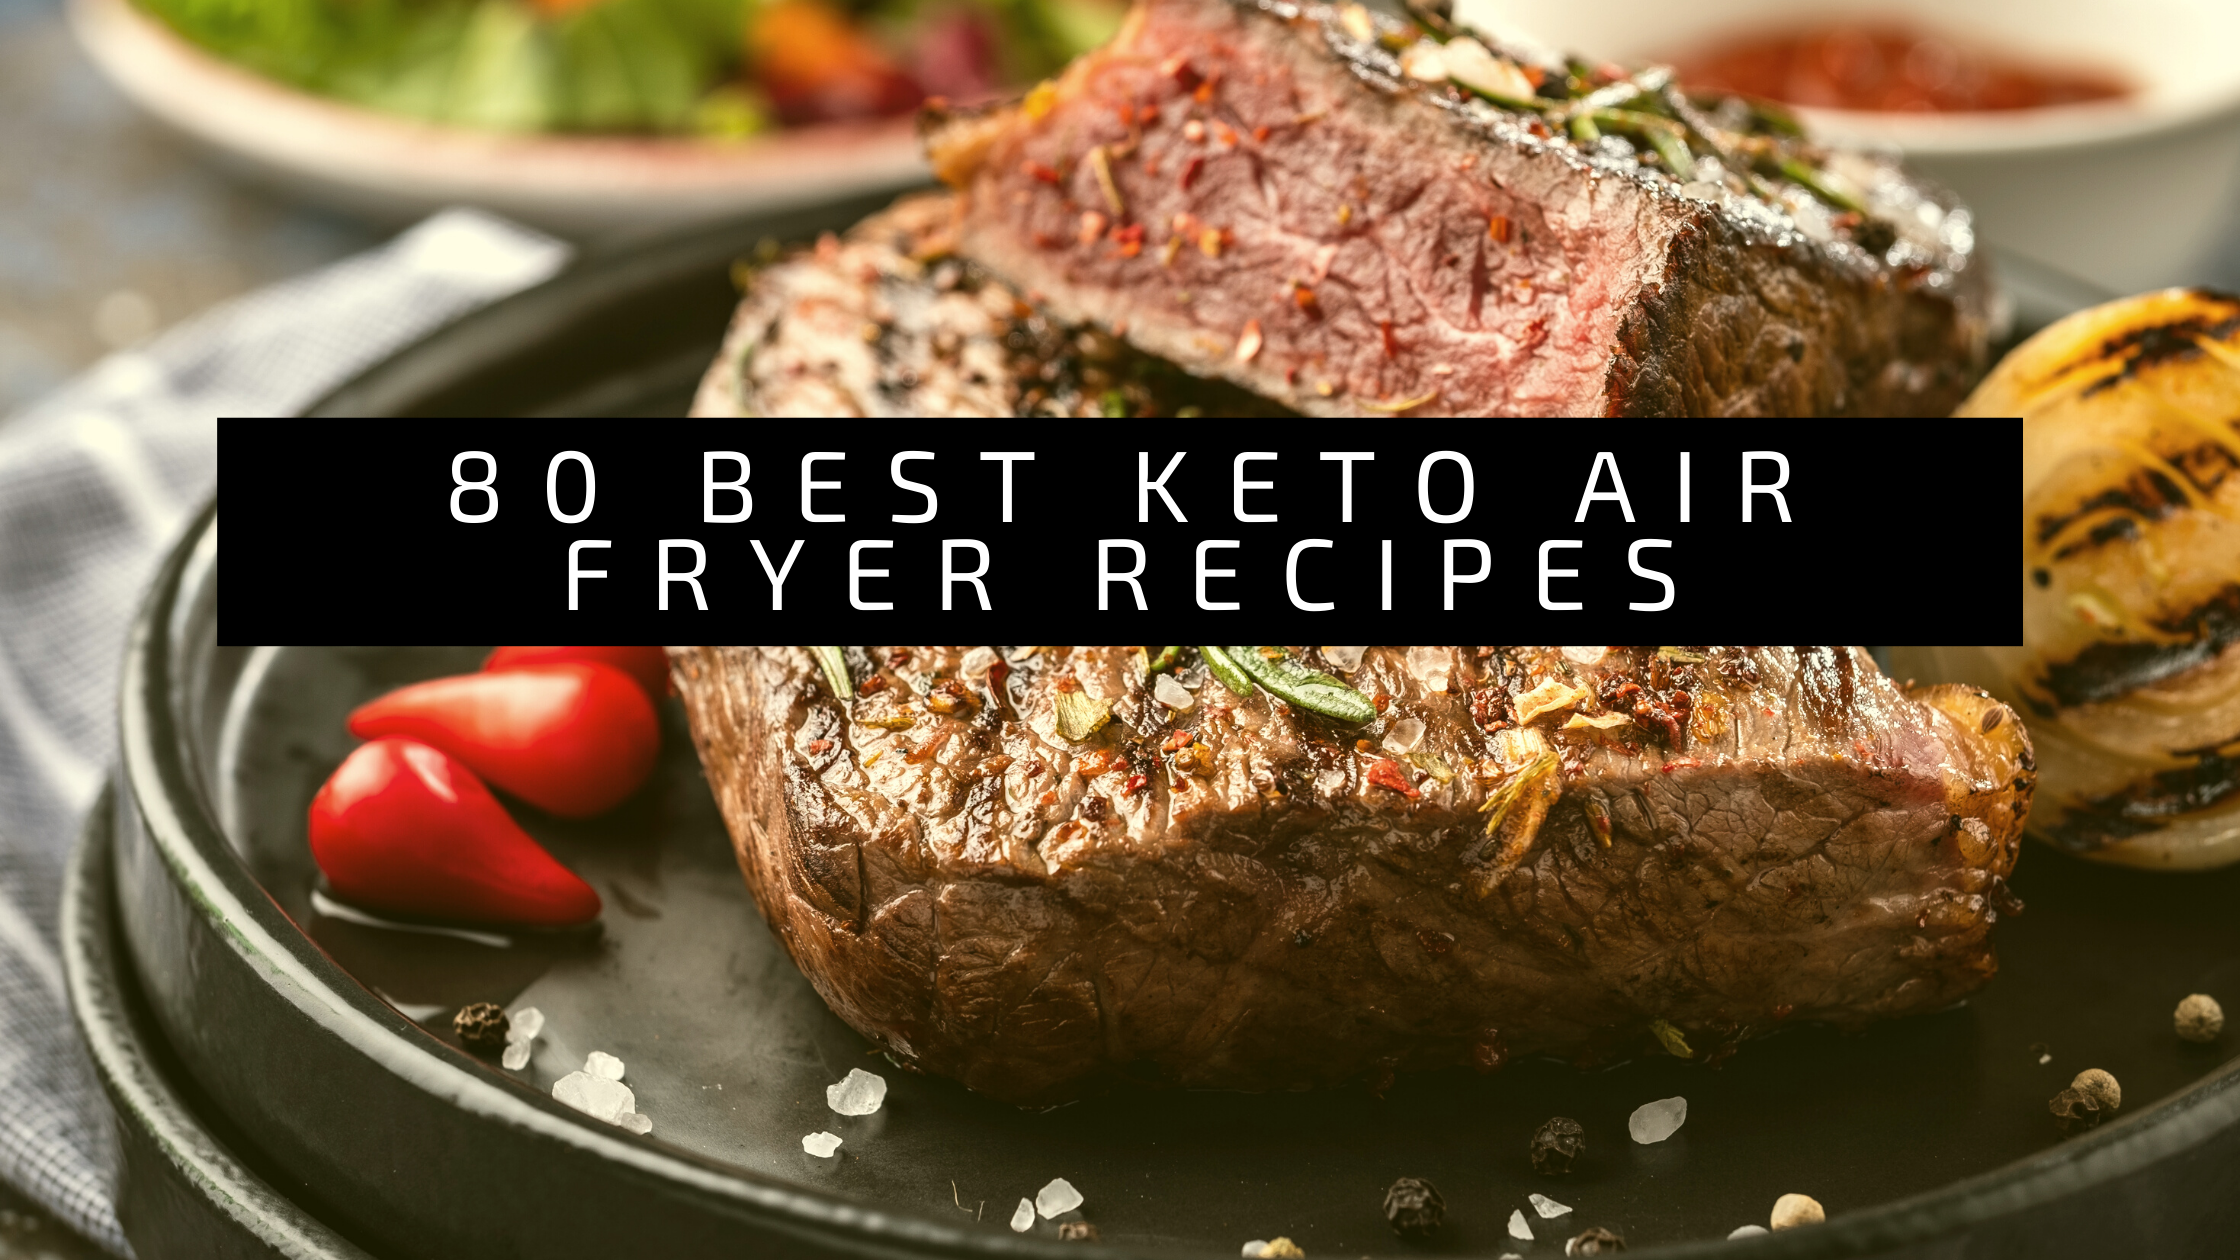 40 Family-Friendly Keto Air Fryer Recipes for Quick and Delicious Meals 5